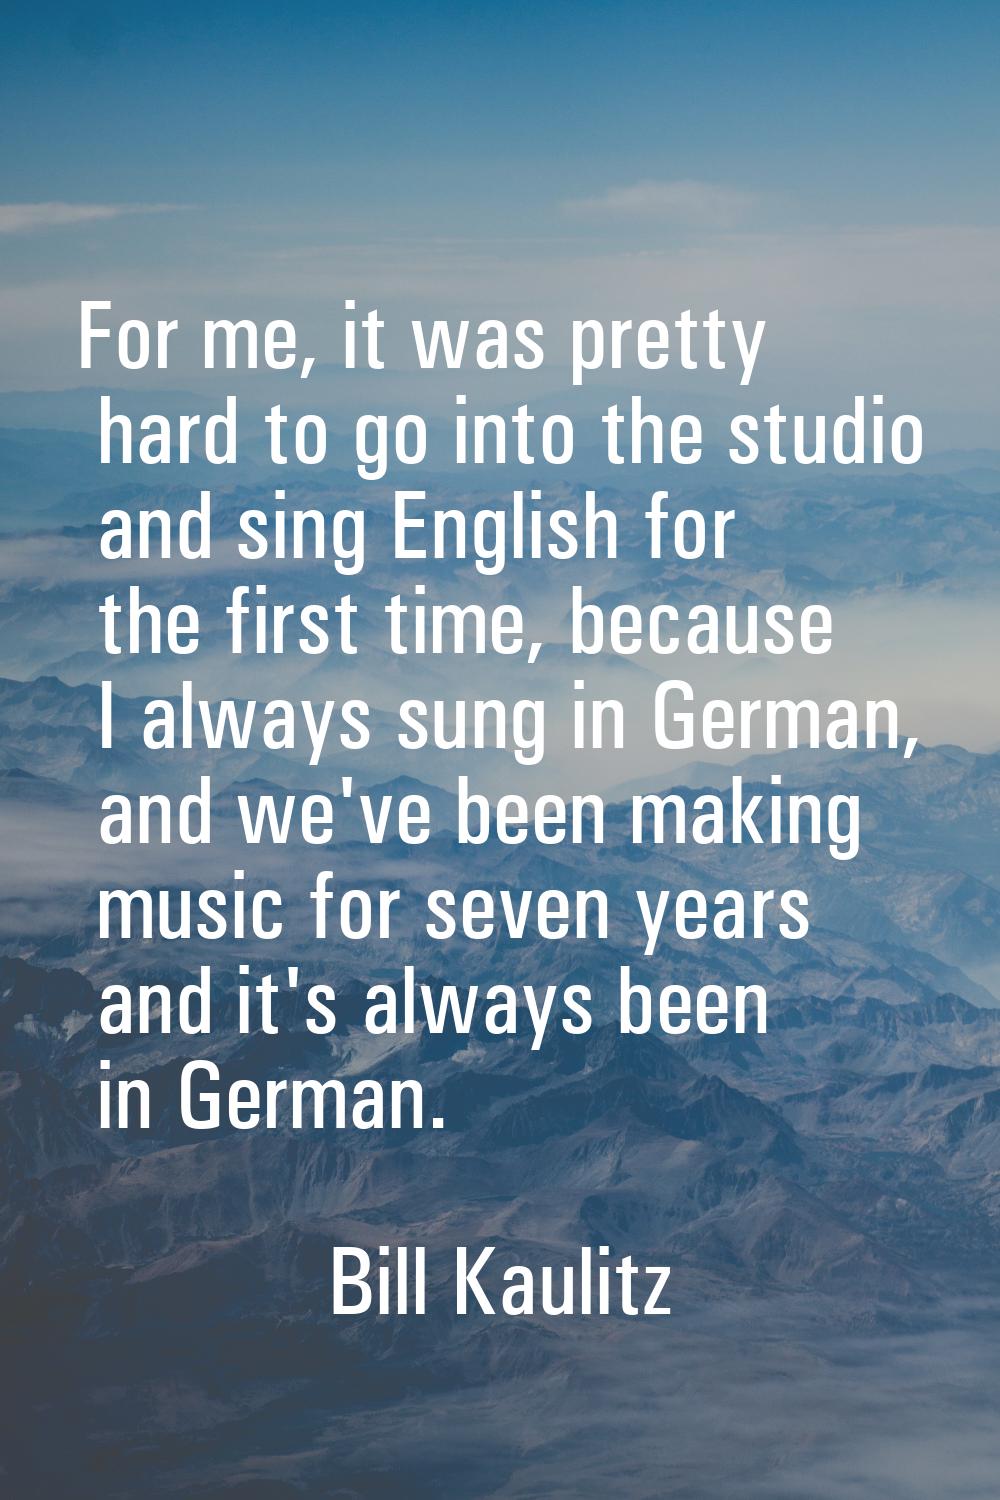 For me, it was pretty hard to go into the studio and sing English for the first time, because I alw